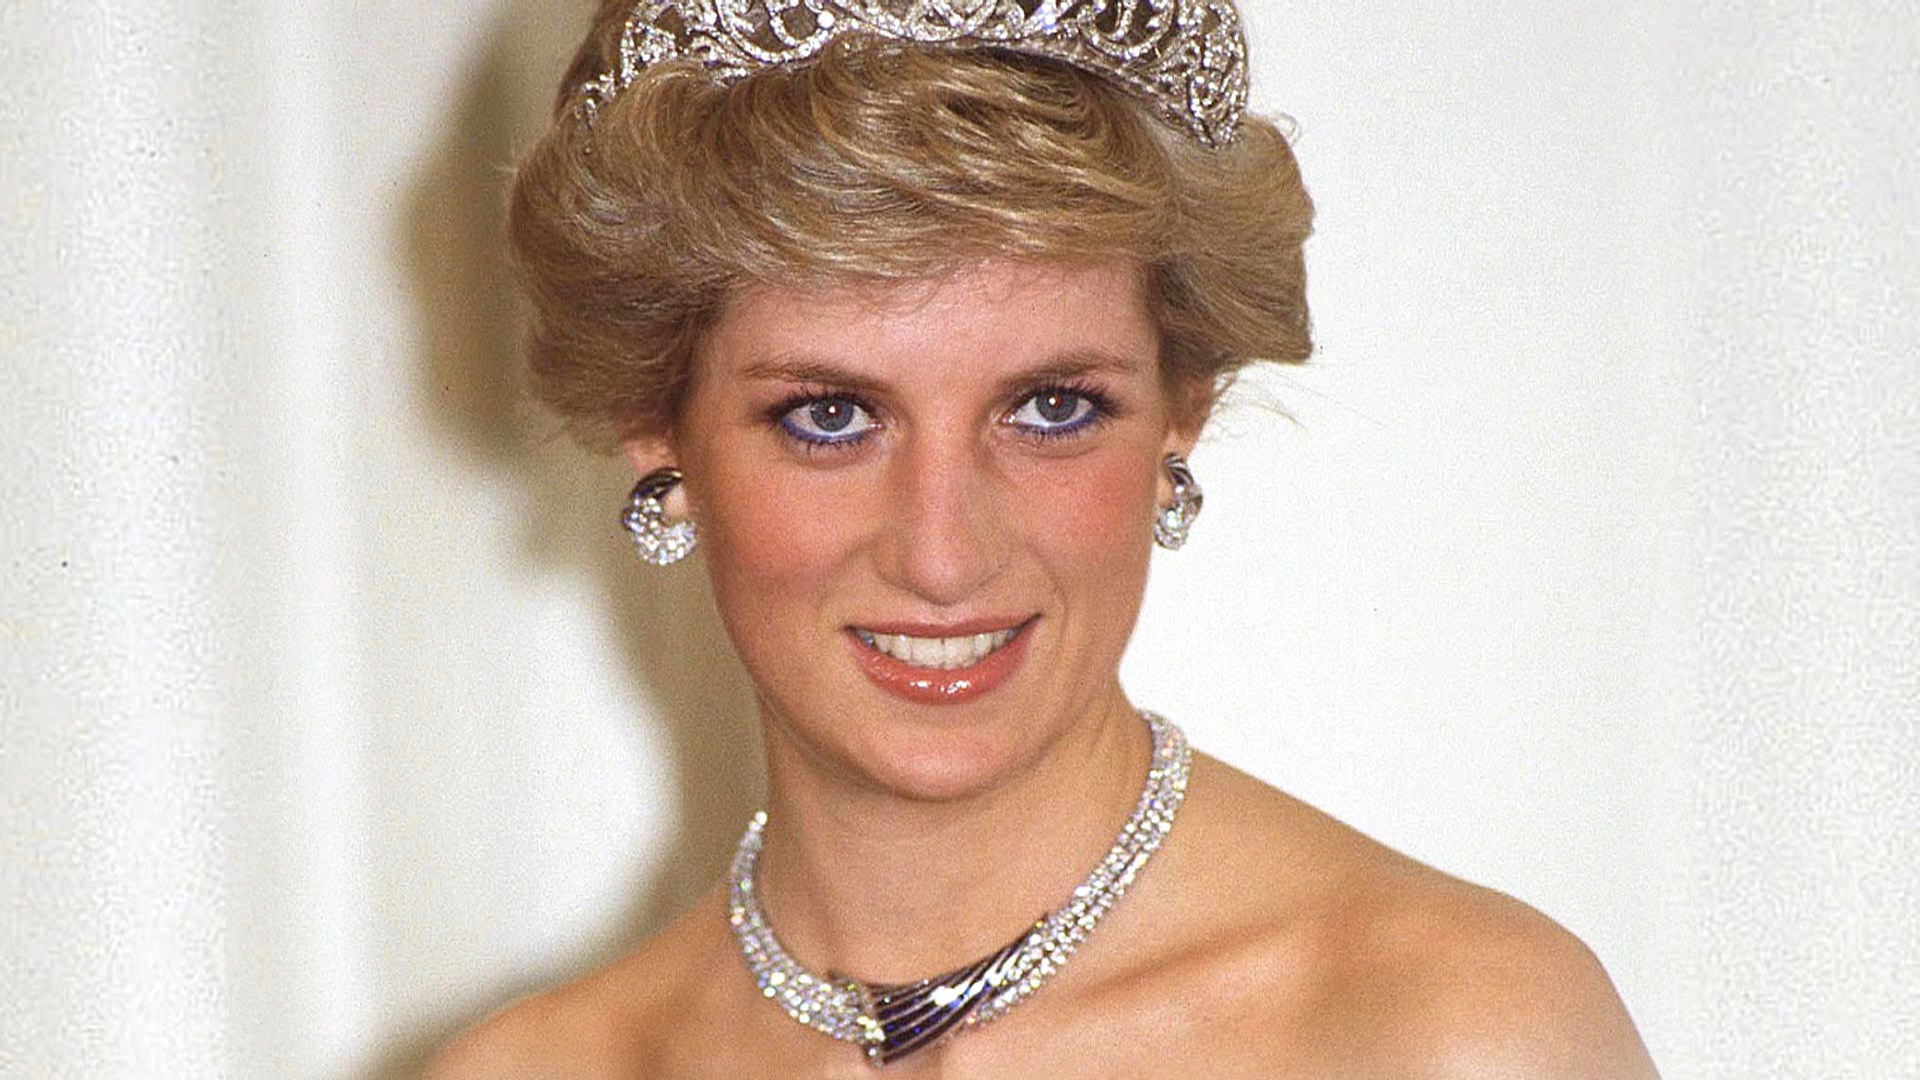 Princess Diana: A leader of fashion in the 1980s and 1990s, Celebrities. 1920x1080 Full HD Wallpaper.